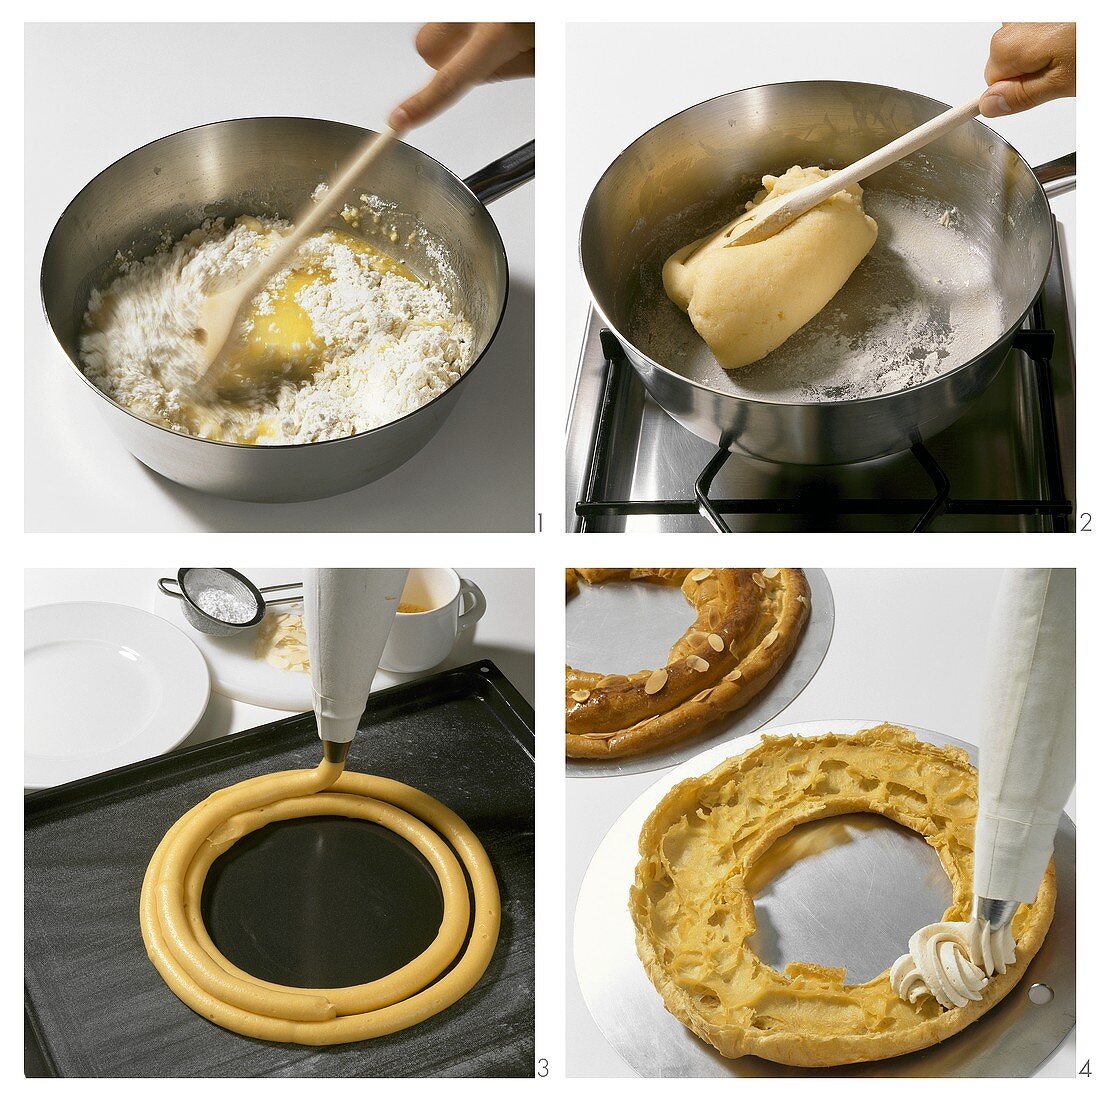 Making a Paris Brest (filled choux pastry ring)